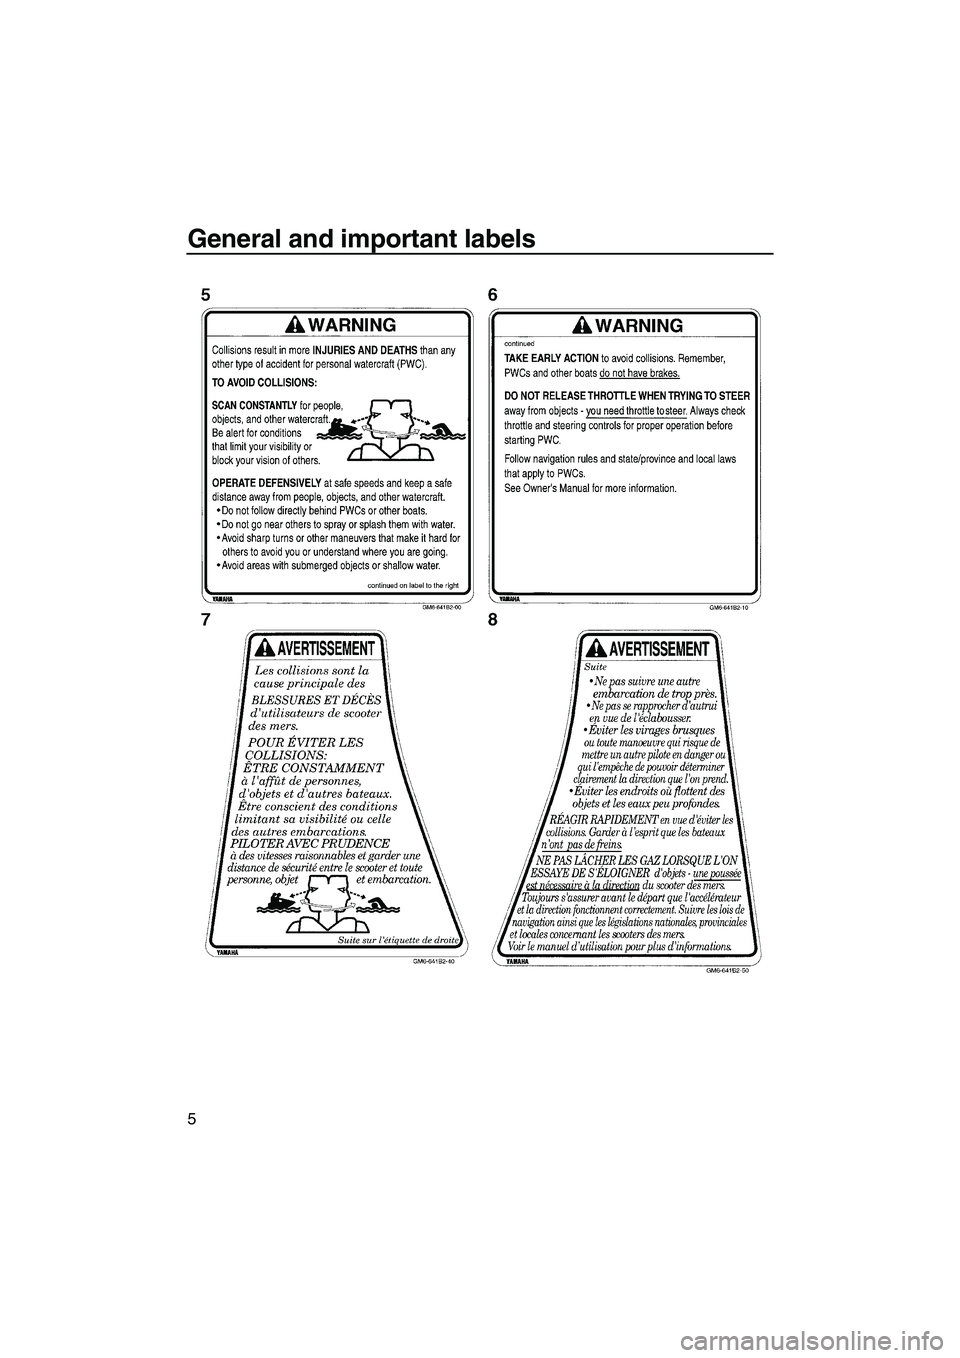 YAMAHA SUPERJET 2007 User Guide General and important labels
5
UF1N75E0.book  Page 5  Tuesday, May 16, 2006  9:53 AM 